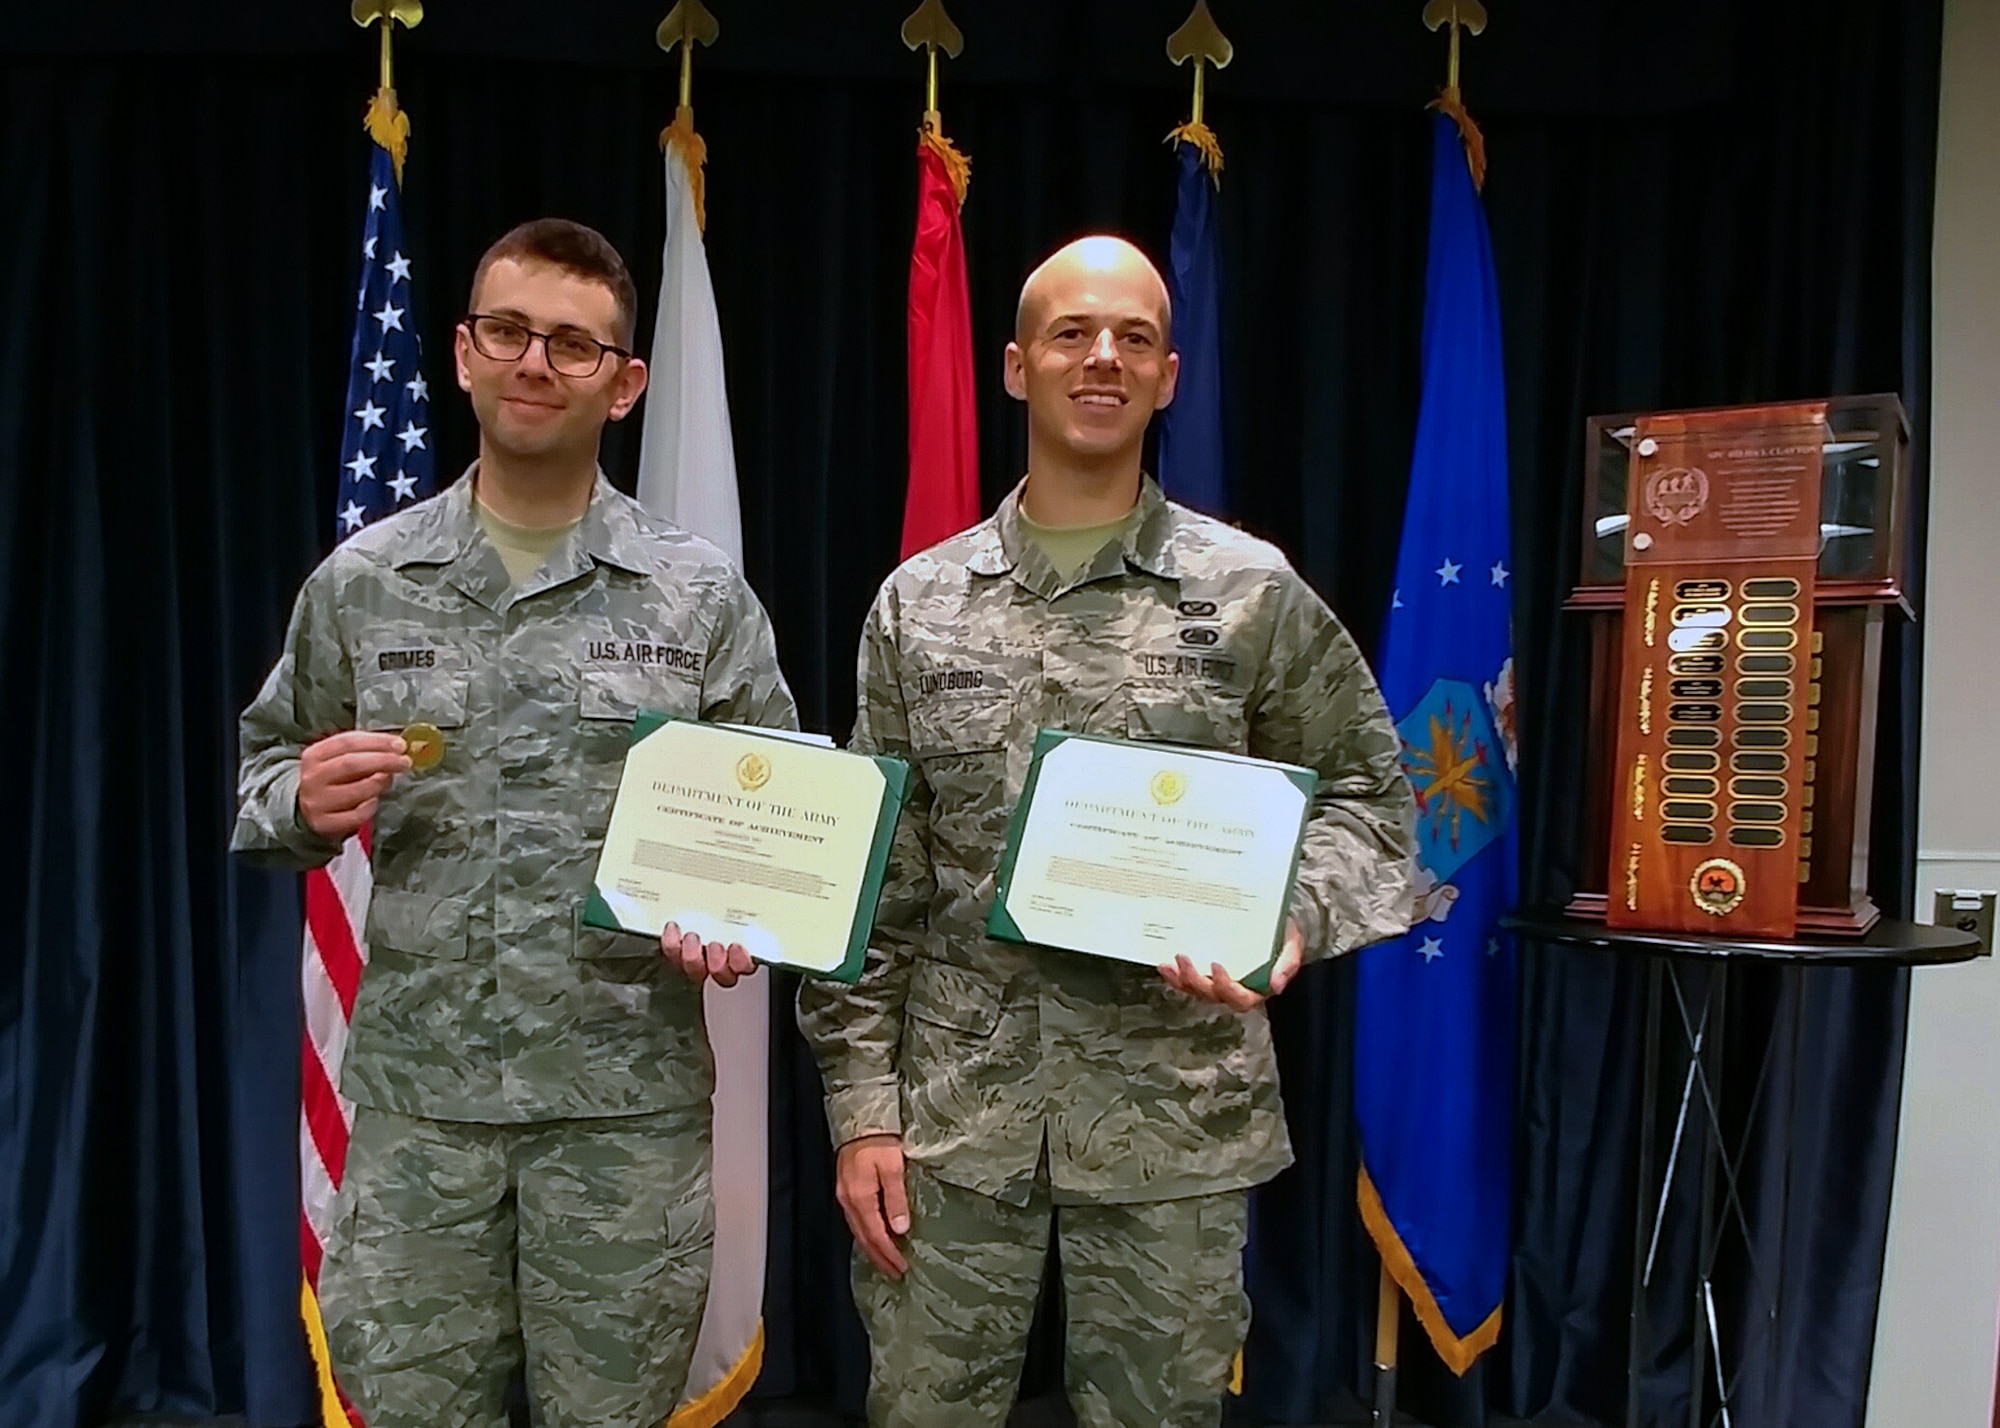 Tech. Sgt. Thomas Grimes and Staff Sgt. Corban Lundborg, both assigned to the 4th Combat Camera Squadron, display their award certificates and coins after being announced as third-place finishers of the 2018 SPC Hilda I. Clayton Best Combat Camera Competition during an award ceremony at Ft. George G. Meade, Md., May 4, 2018. The competition is an annual event open to all branches of the military, it's hosted by the 55th Signal Company (Combat Camera) in order to test the technical and tactical proficiencies of Defense Department combat photographers. (U.S. Air Force photo by Maj. Zach Anderson)